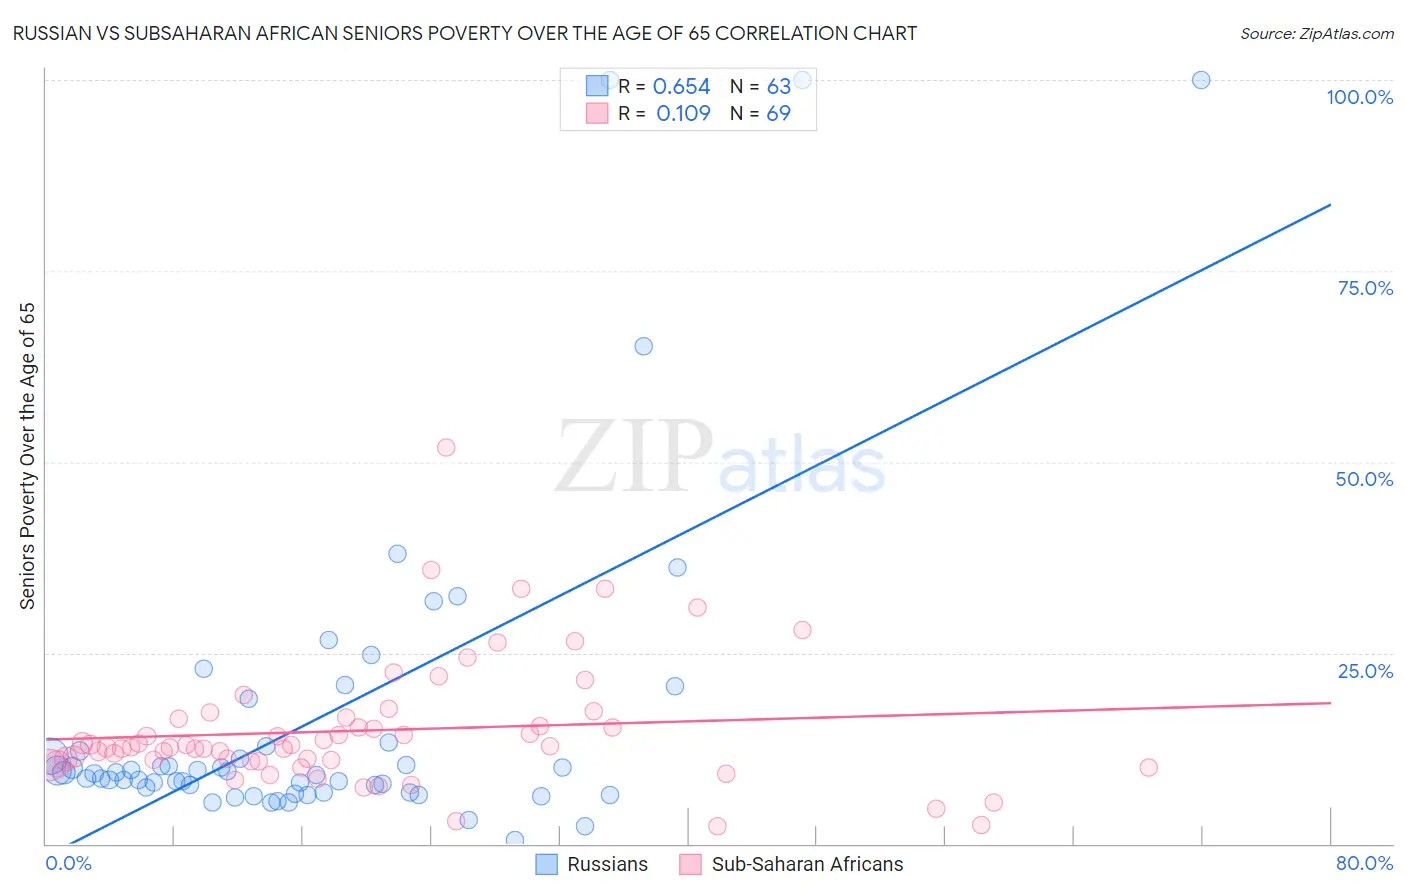 Russian vs Subsaharan African Seniors Poverty Over the Age of 65